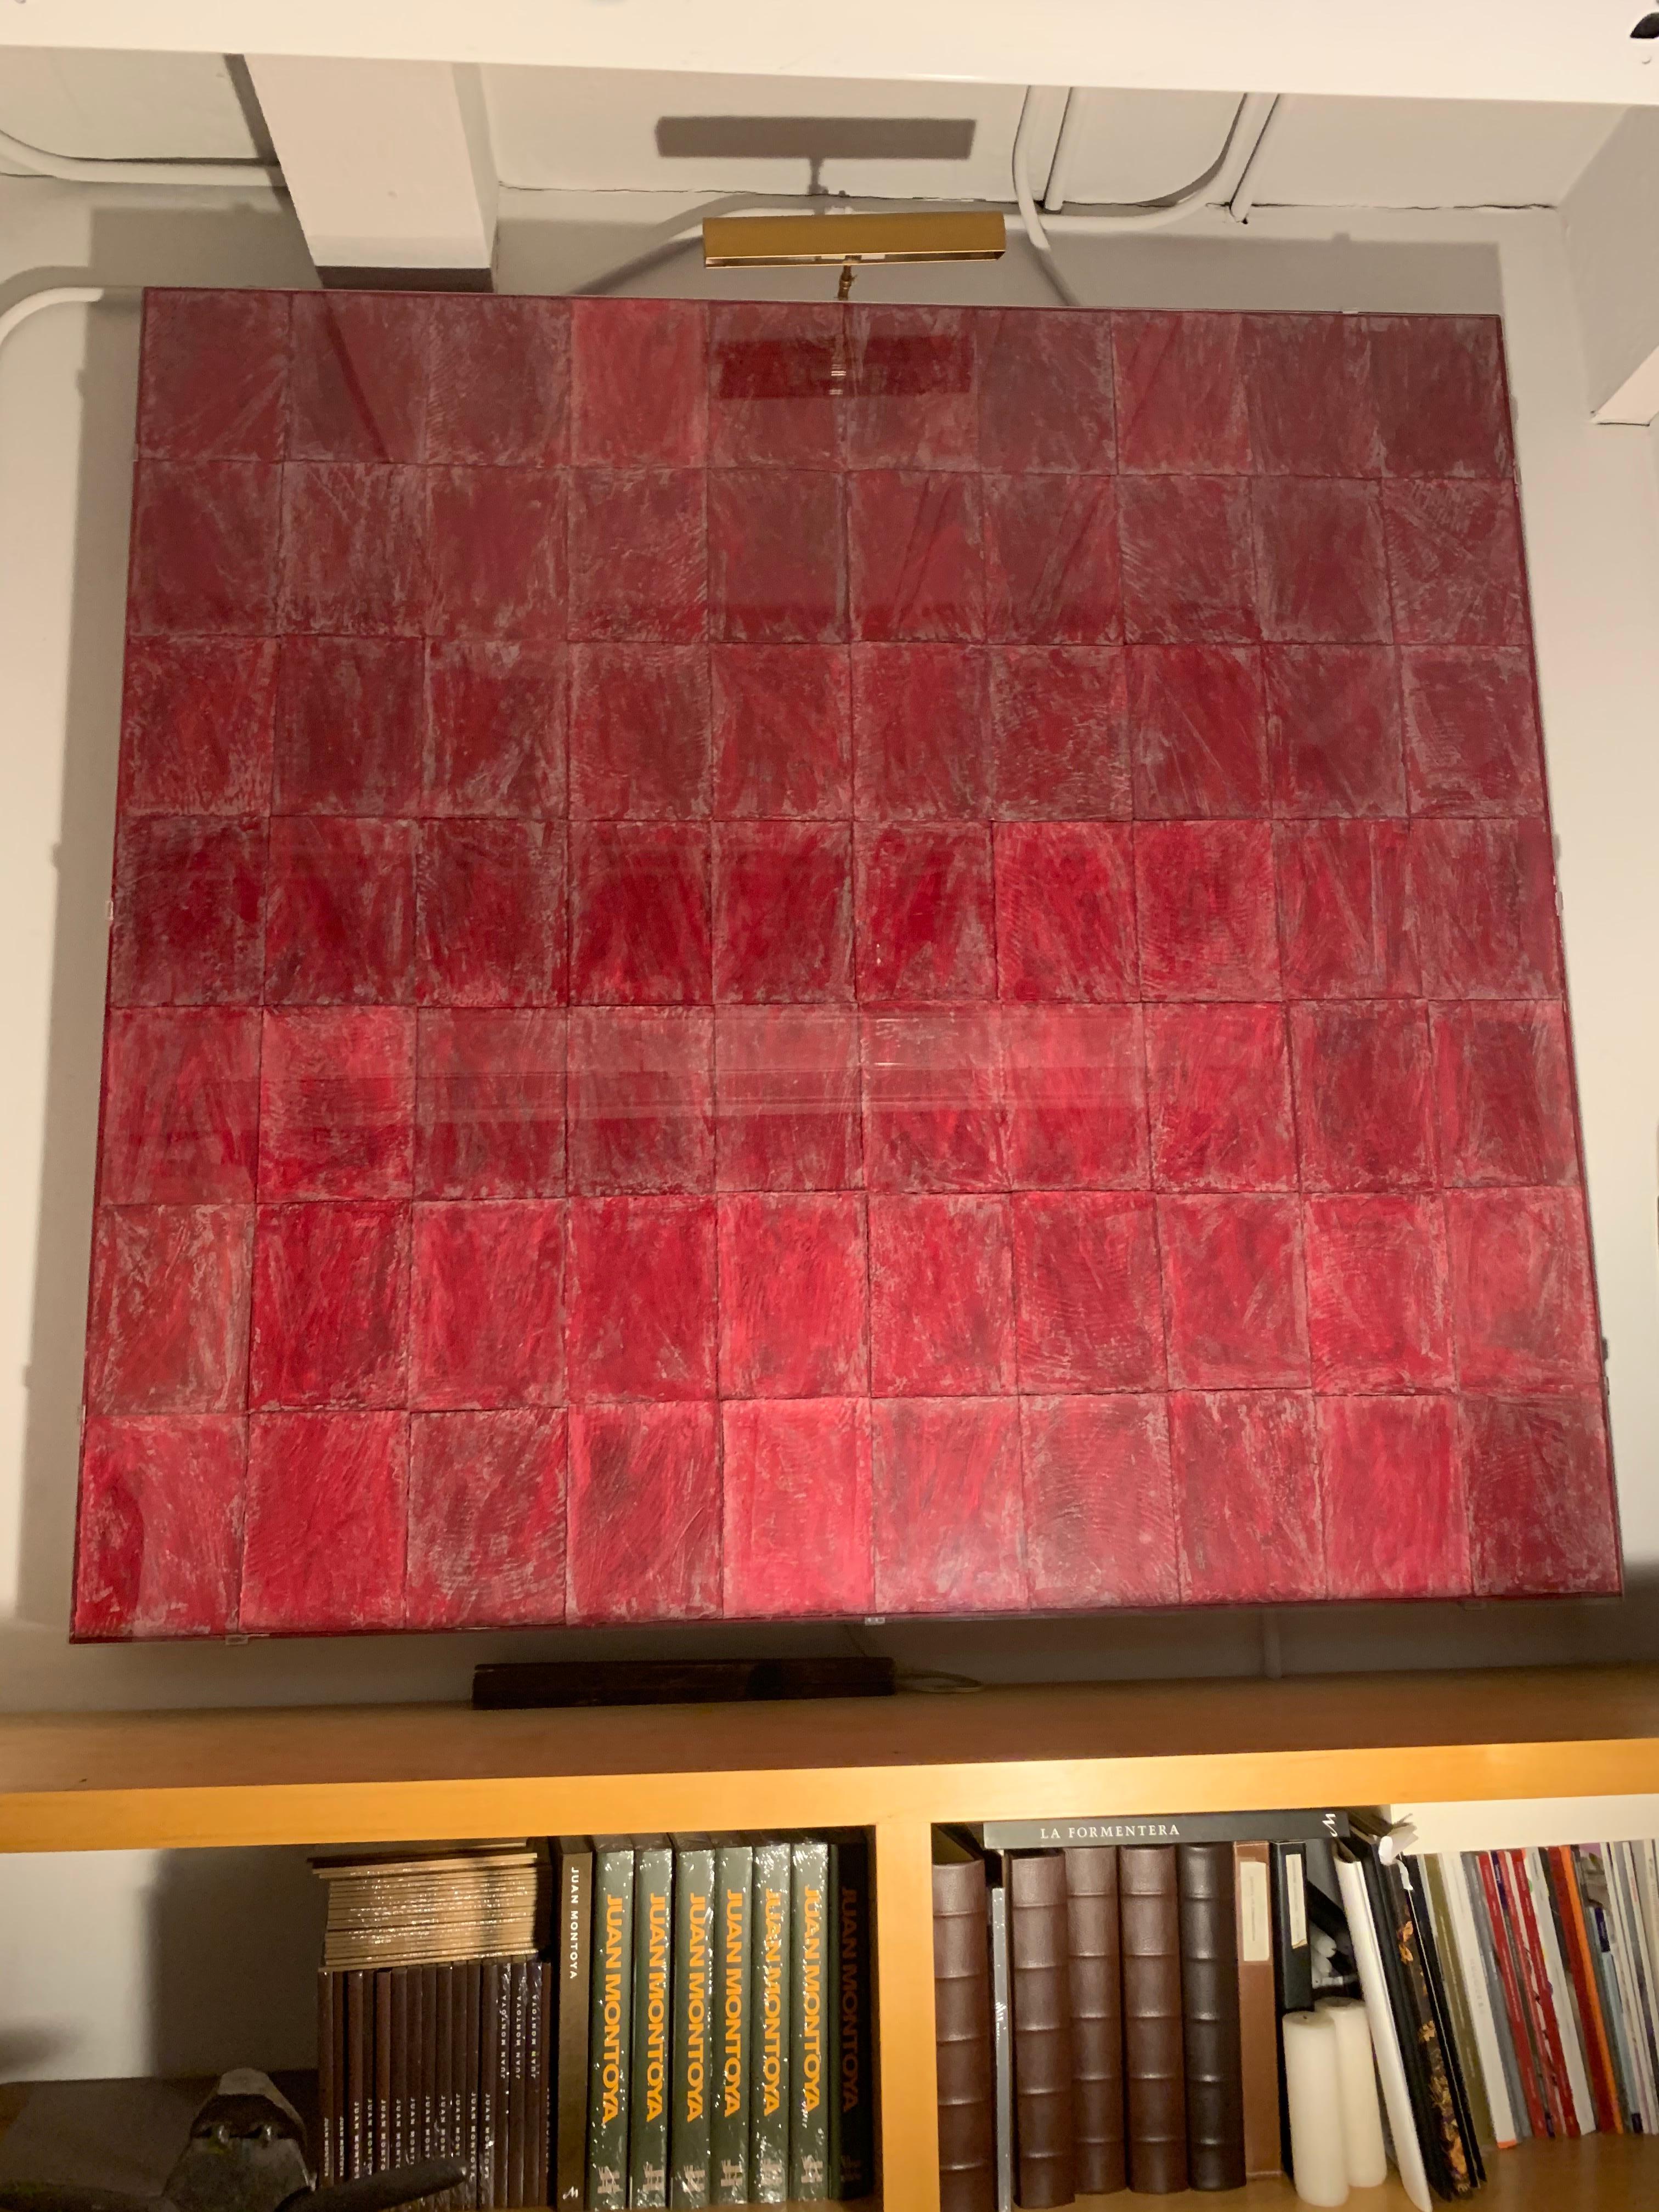 Painting by artist Robert Courtright on paper mounted on wood panel. Collage with 70 red rectangles. Mounted under plexiglass.

Property from esteemed interior designer Juan Montoya. Juan Montoya is one of the most acclaimed and prolific interior